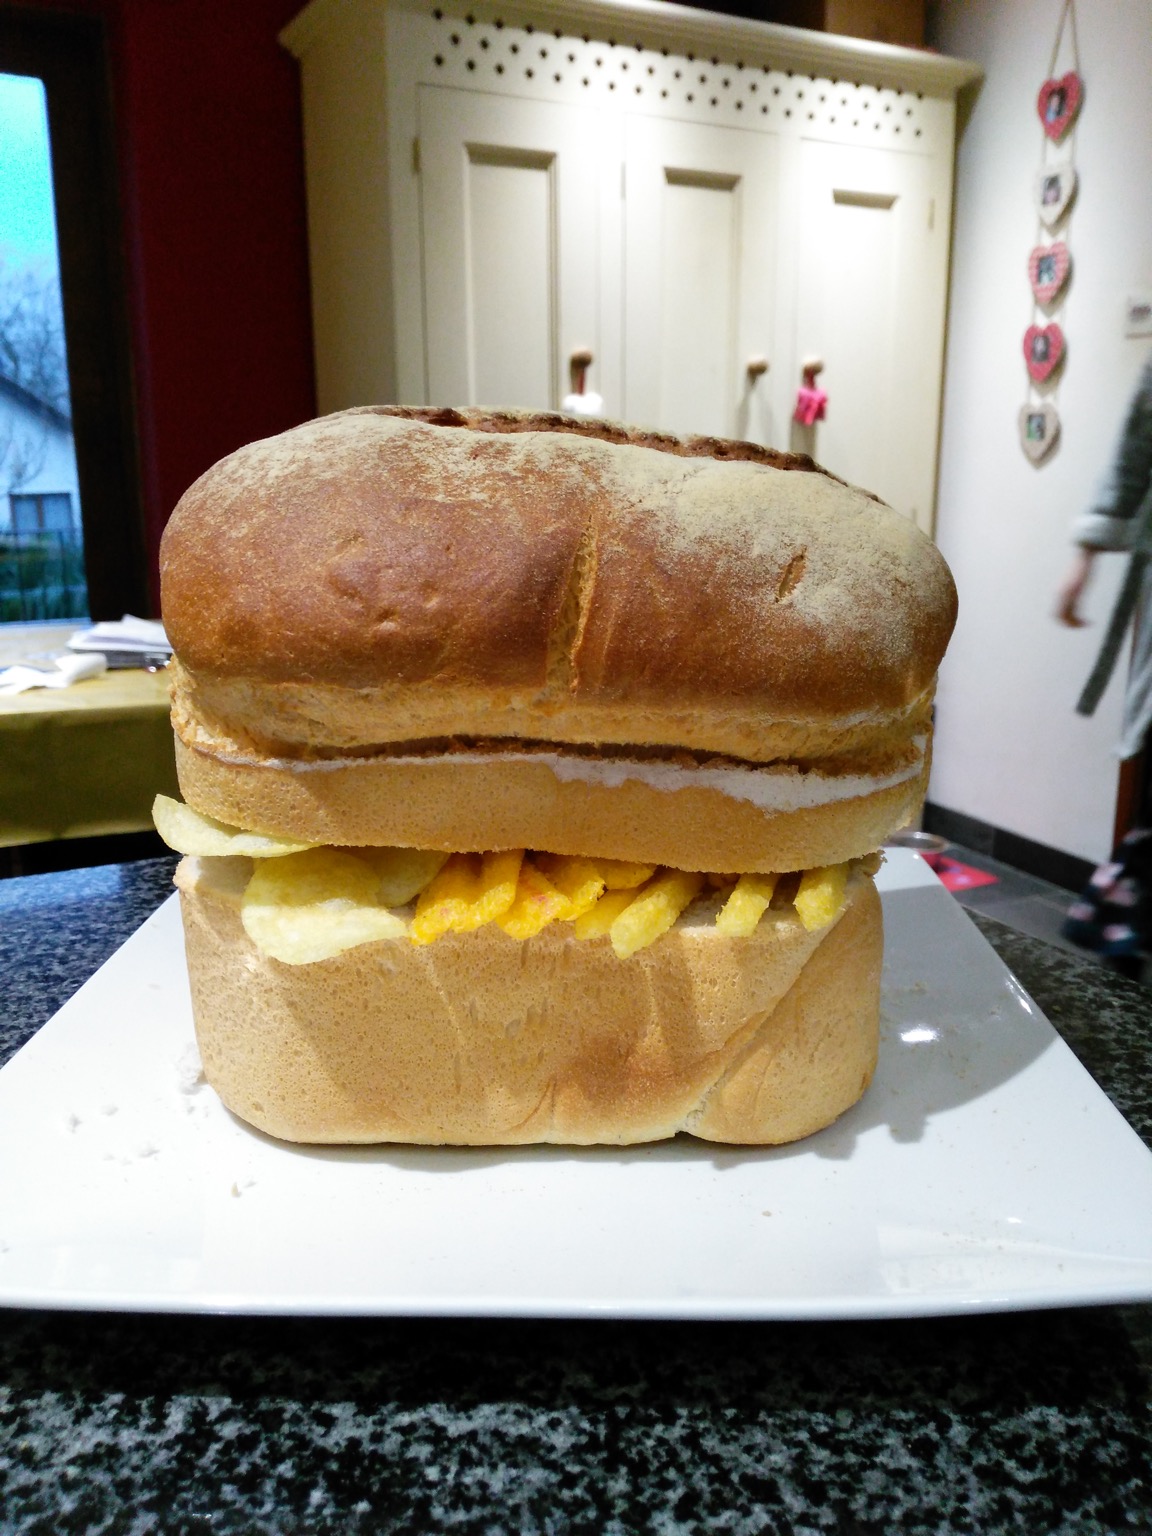 Chipsticks, Frazzles and crisps in a whole loaf